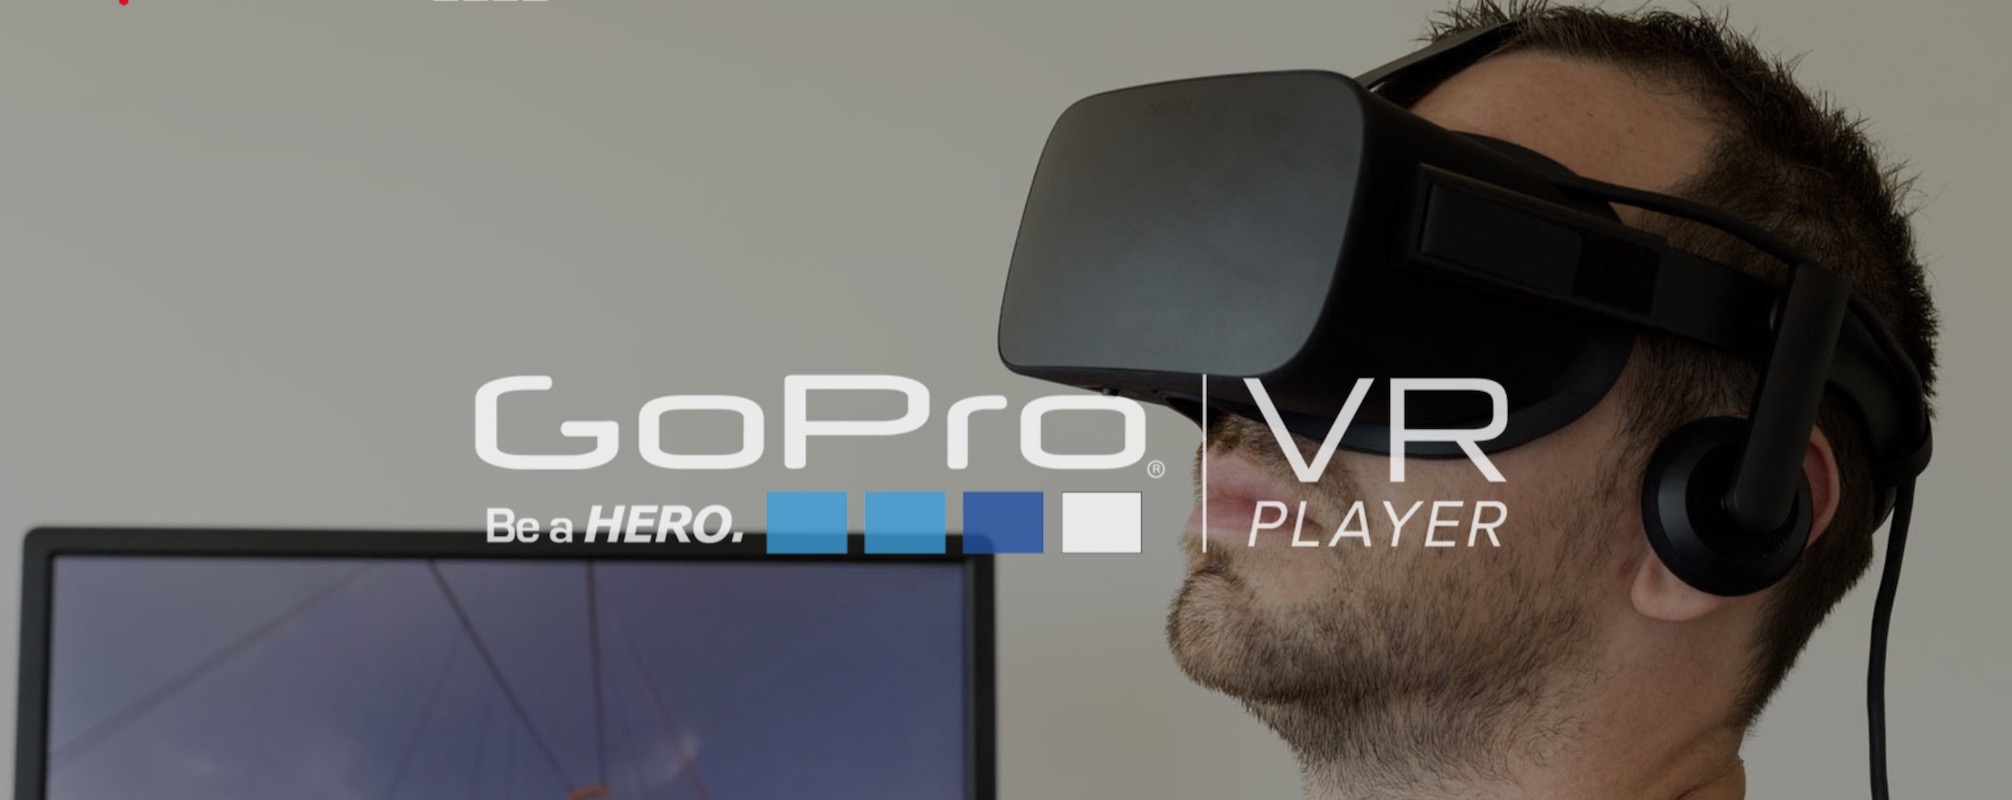 gopro vr player for linux mint